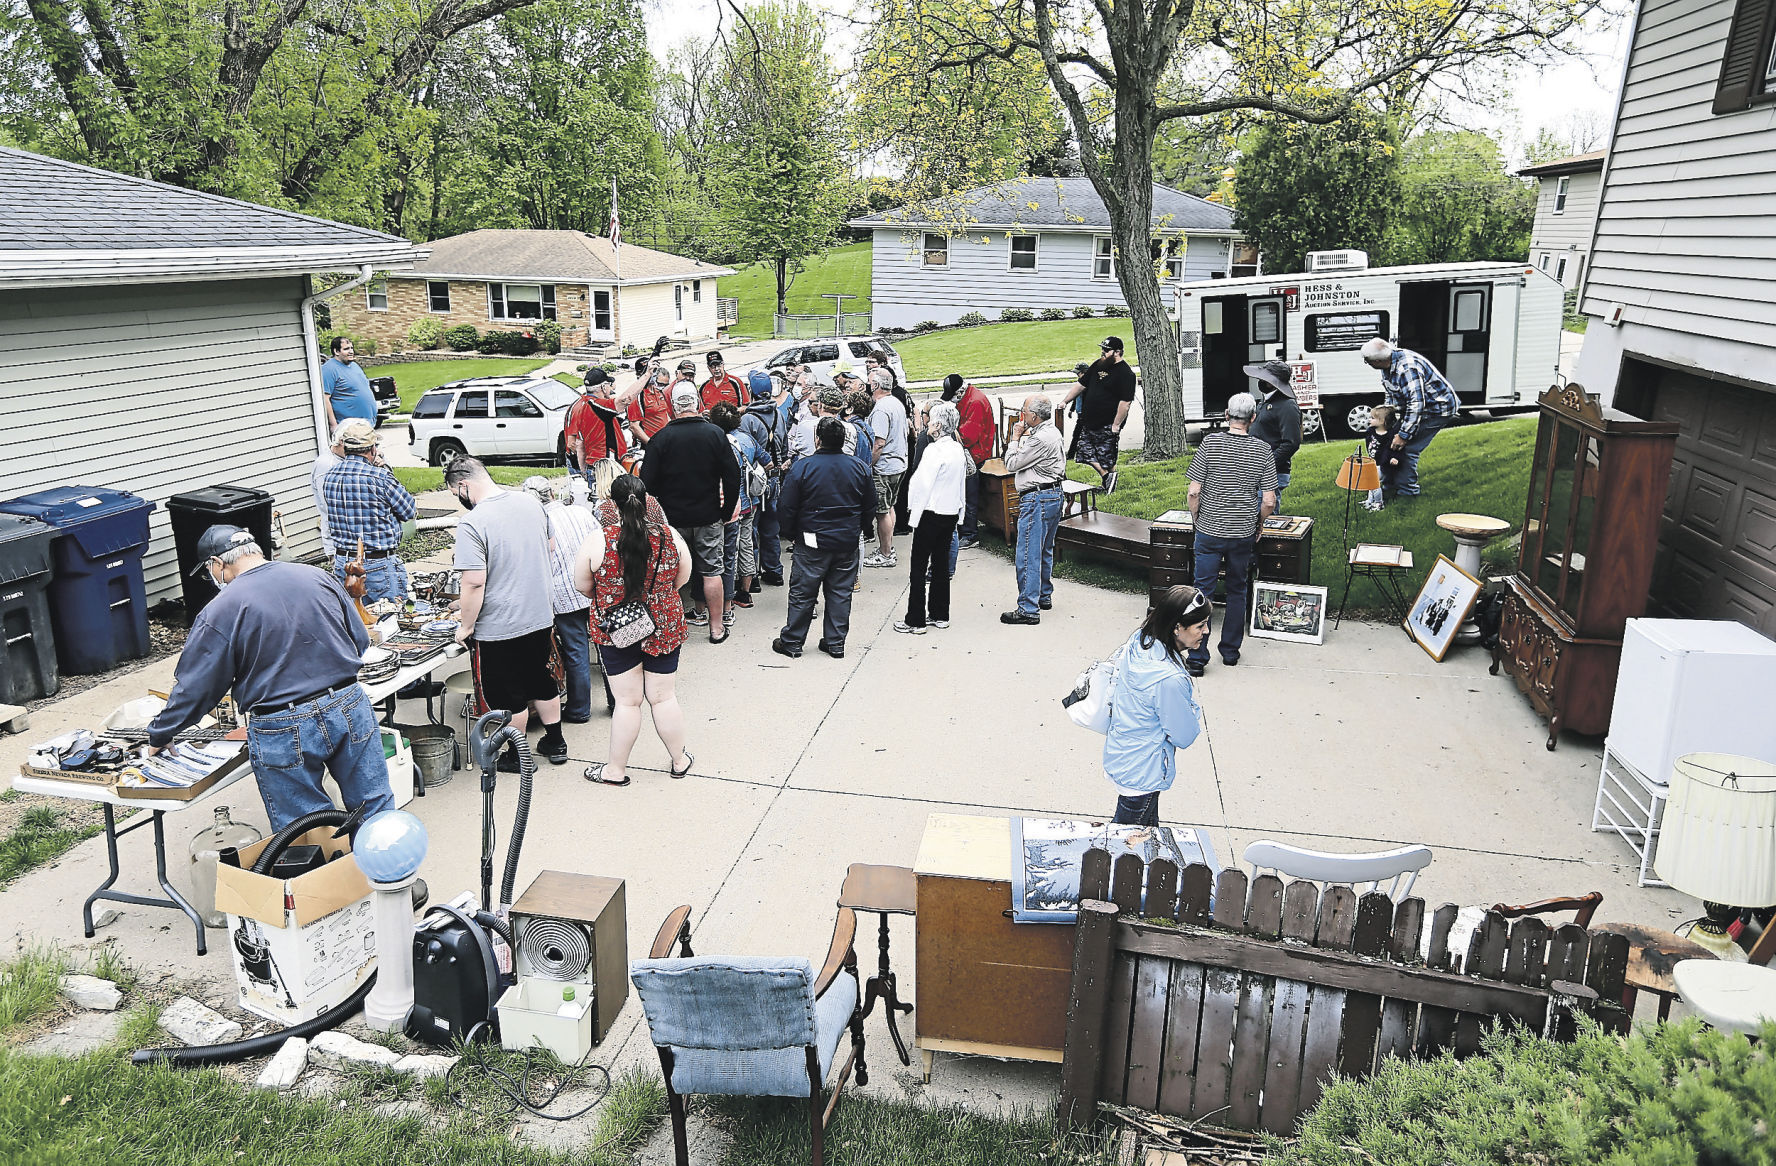 People look over items to bid on during an estate auction held in Dubuque. PHOTO CREDIT: Dave Kettering